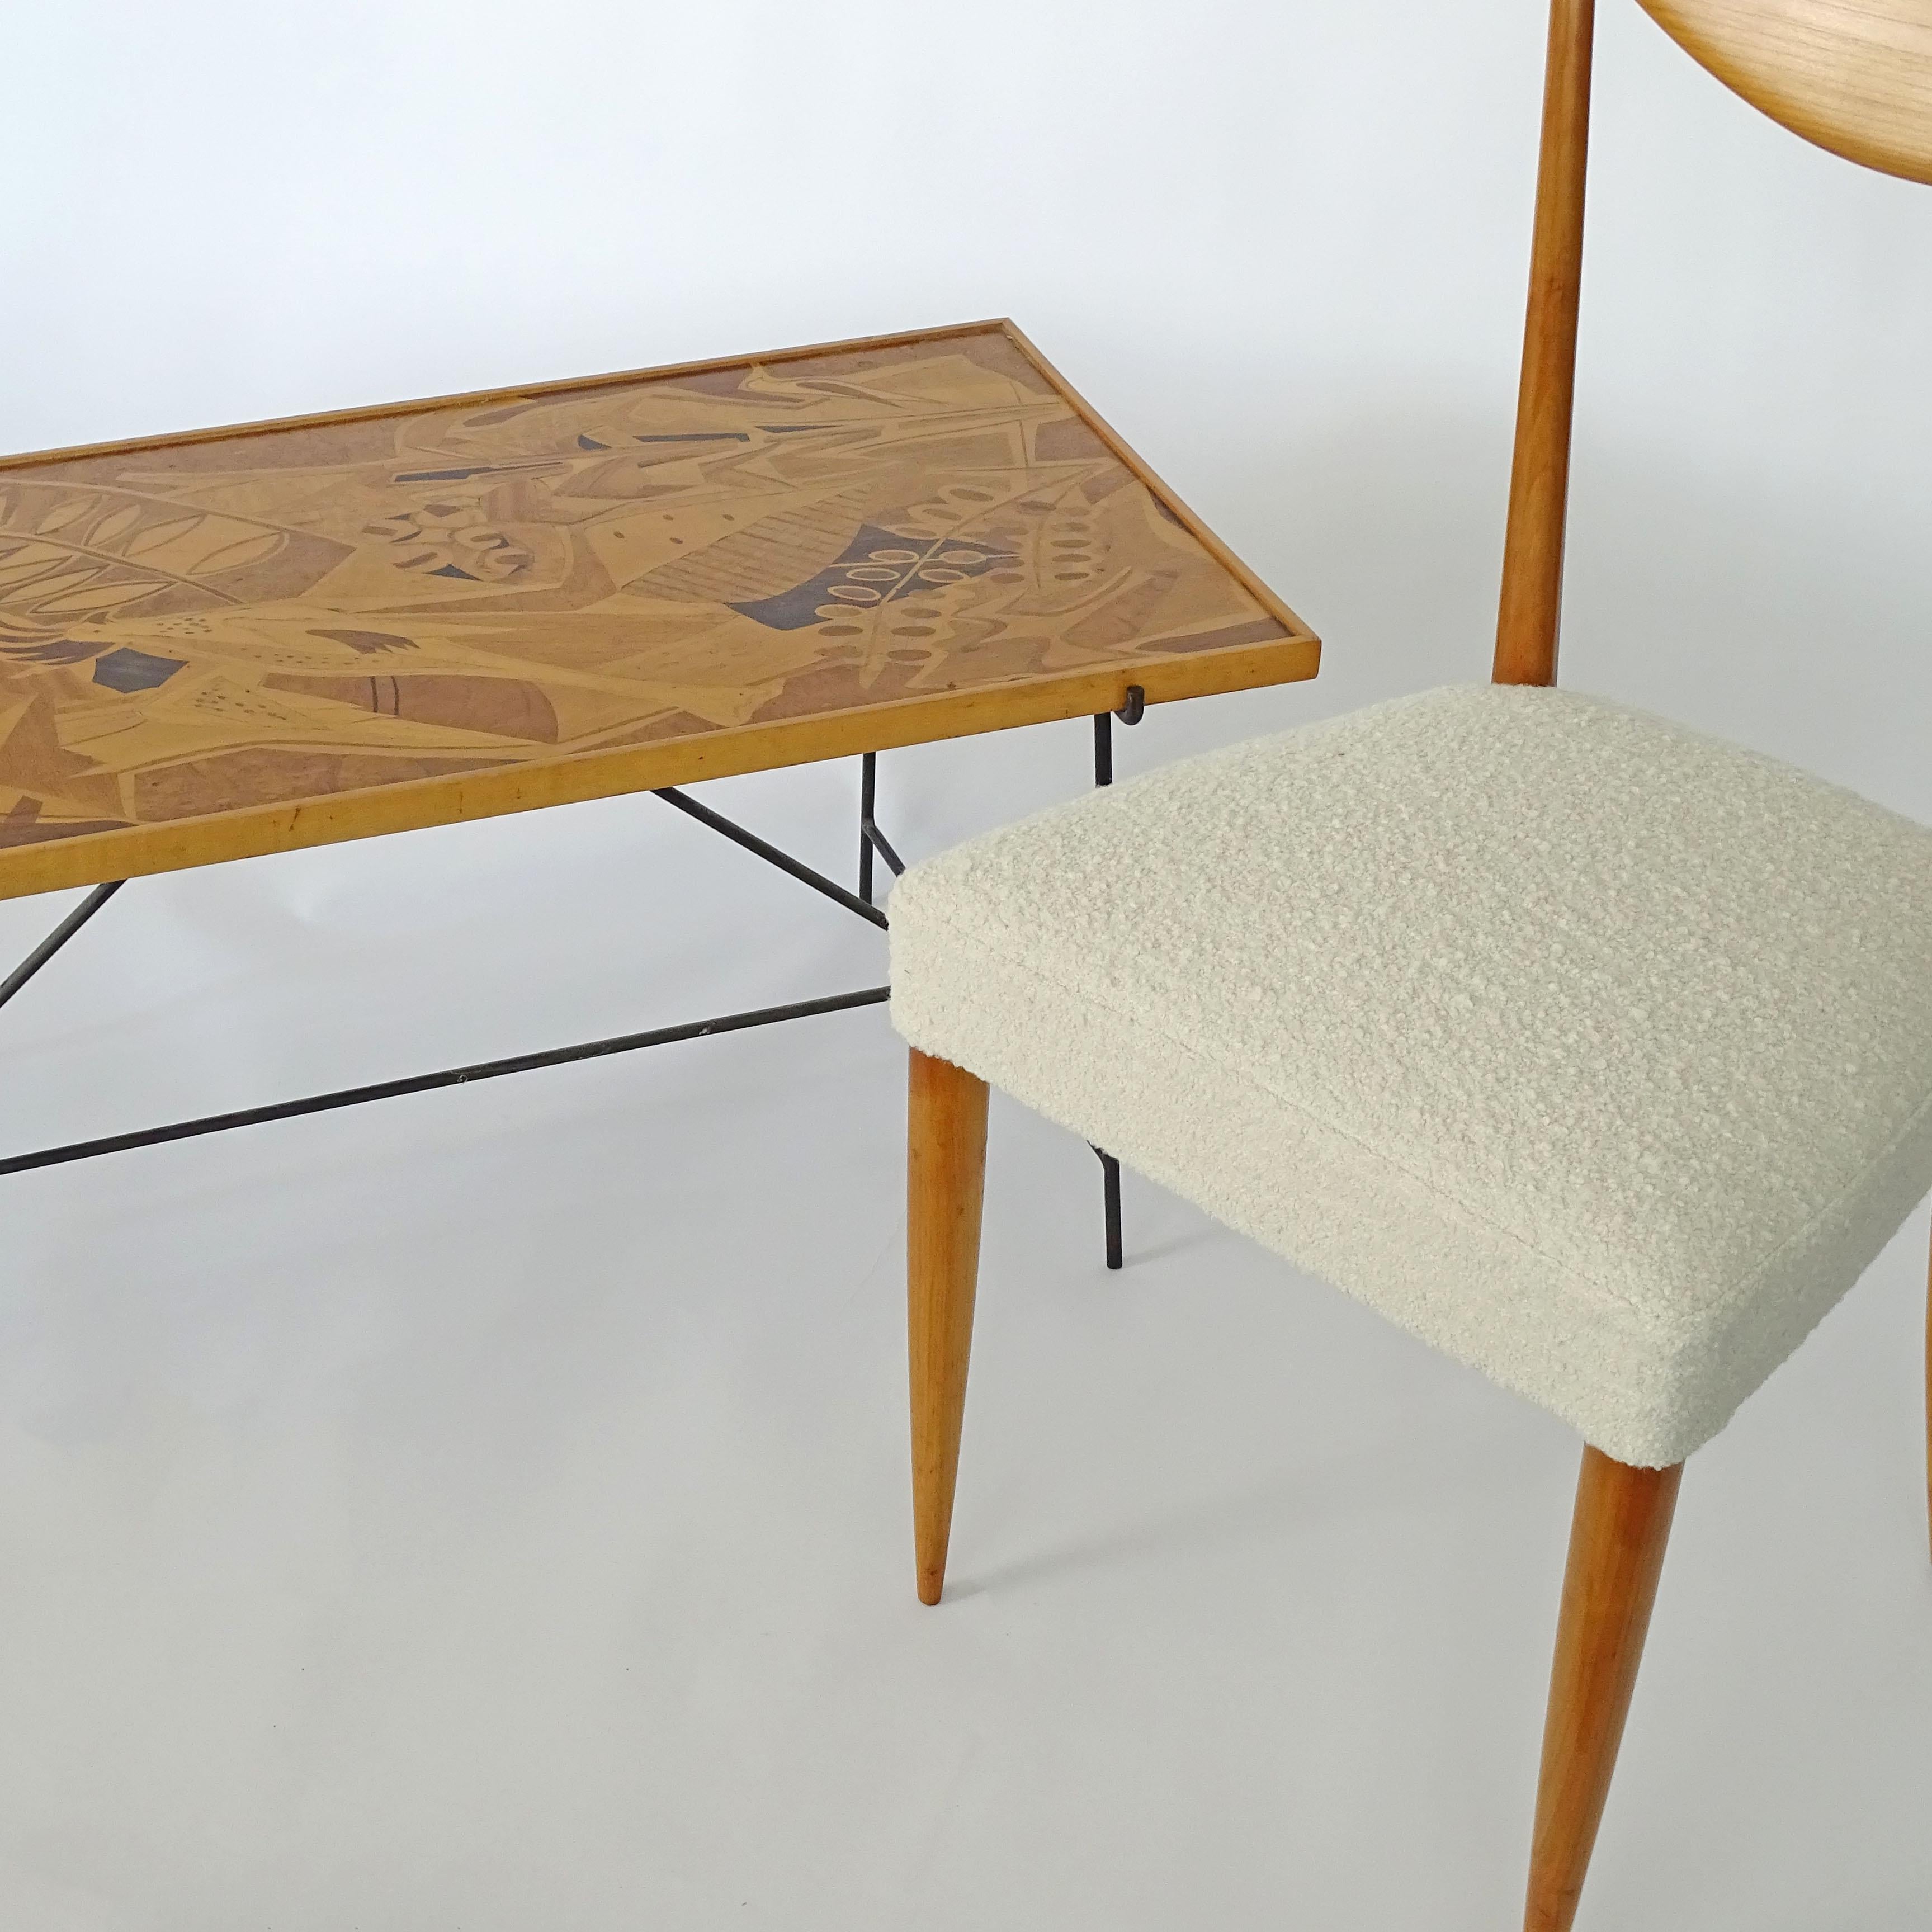 Saporiti 1950s Marquetry Wood Top and Metal Base Coffee Table For Sale 4